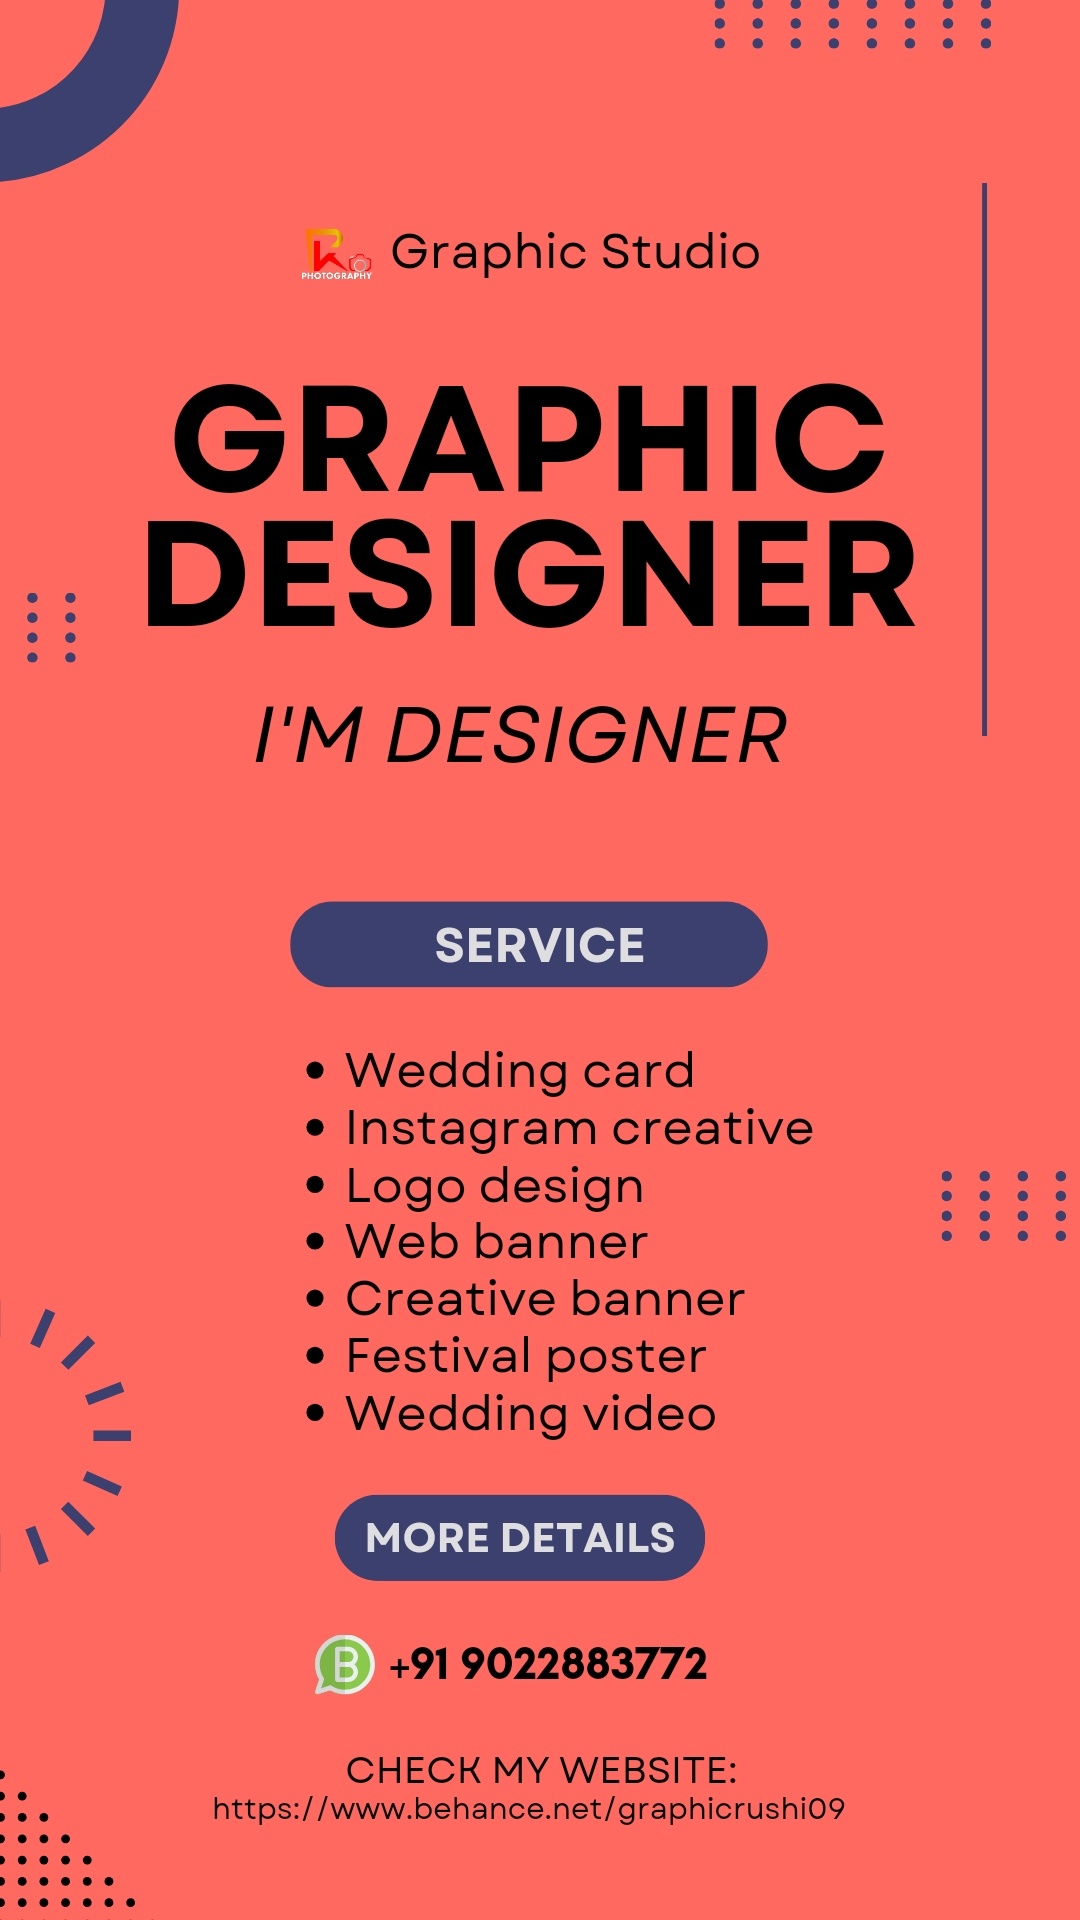 Graphic Designer; Exp: Some experience (0-1 years)